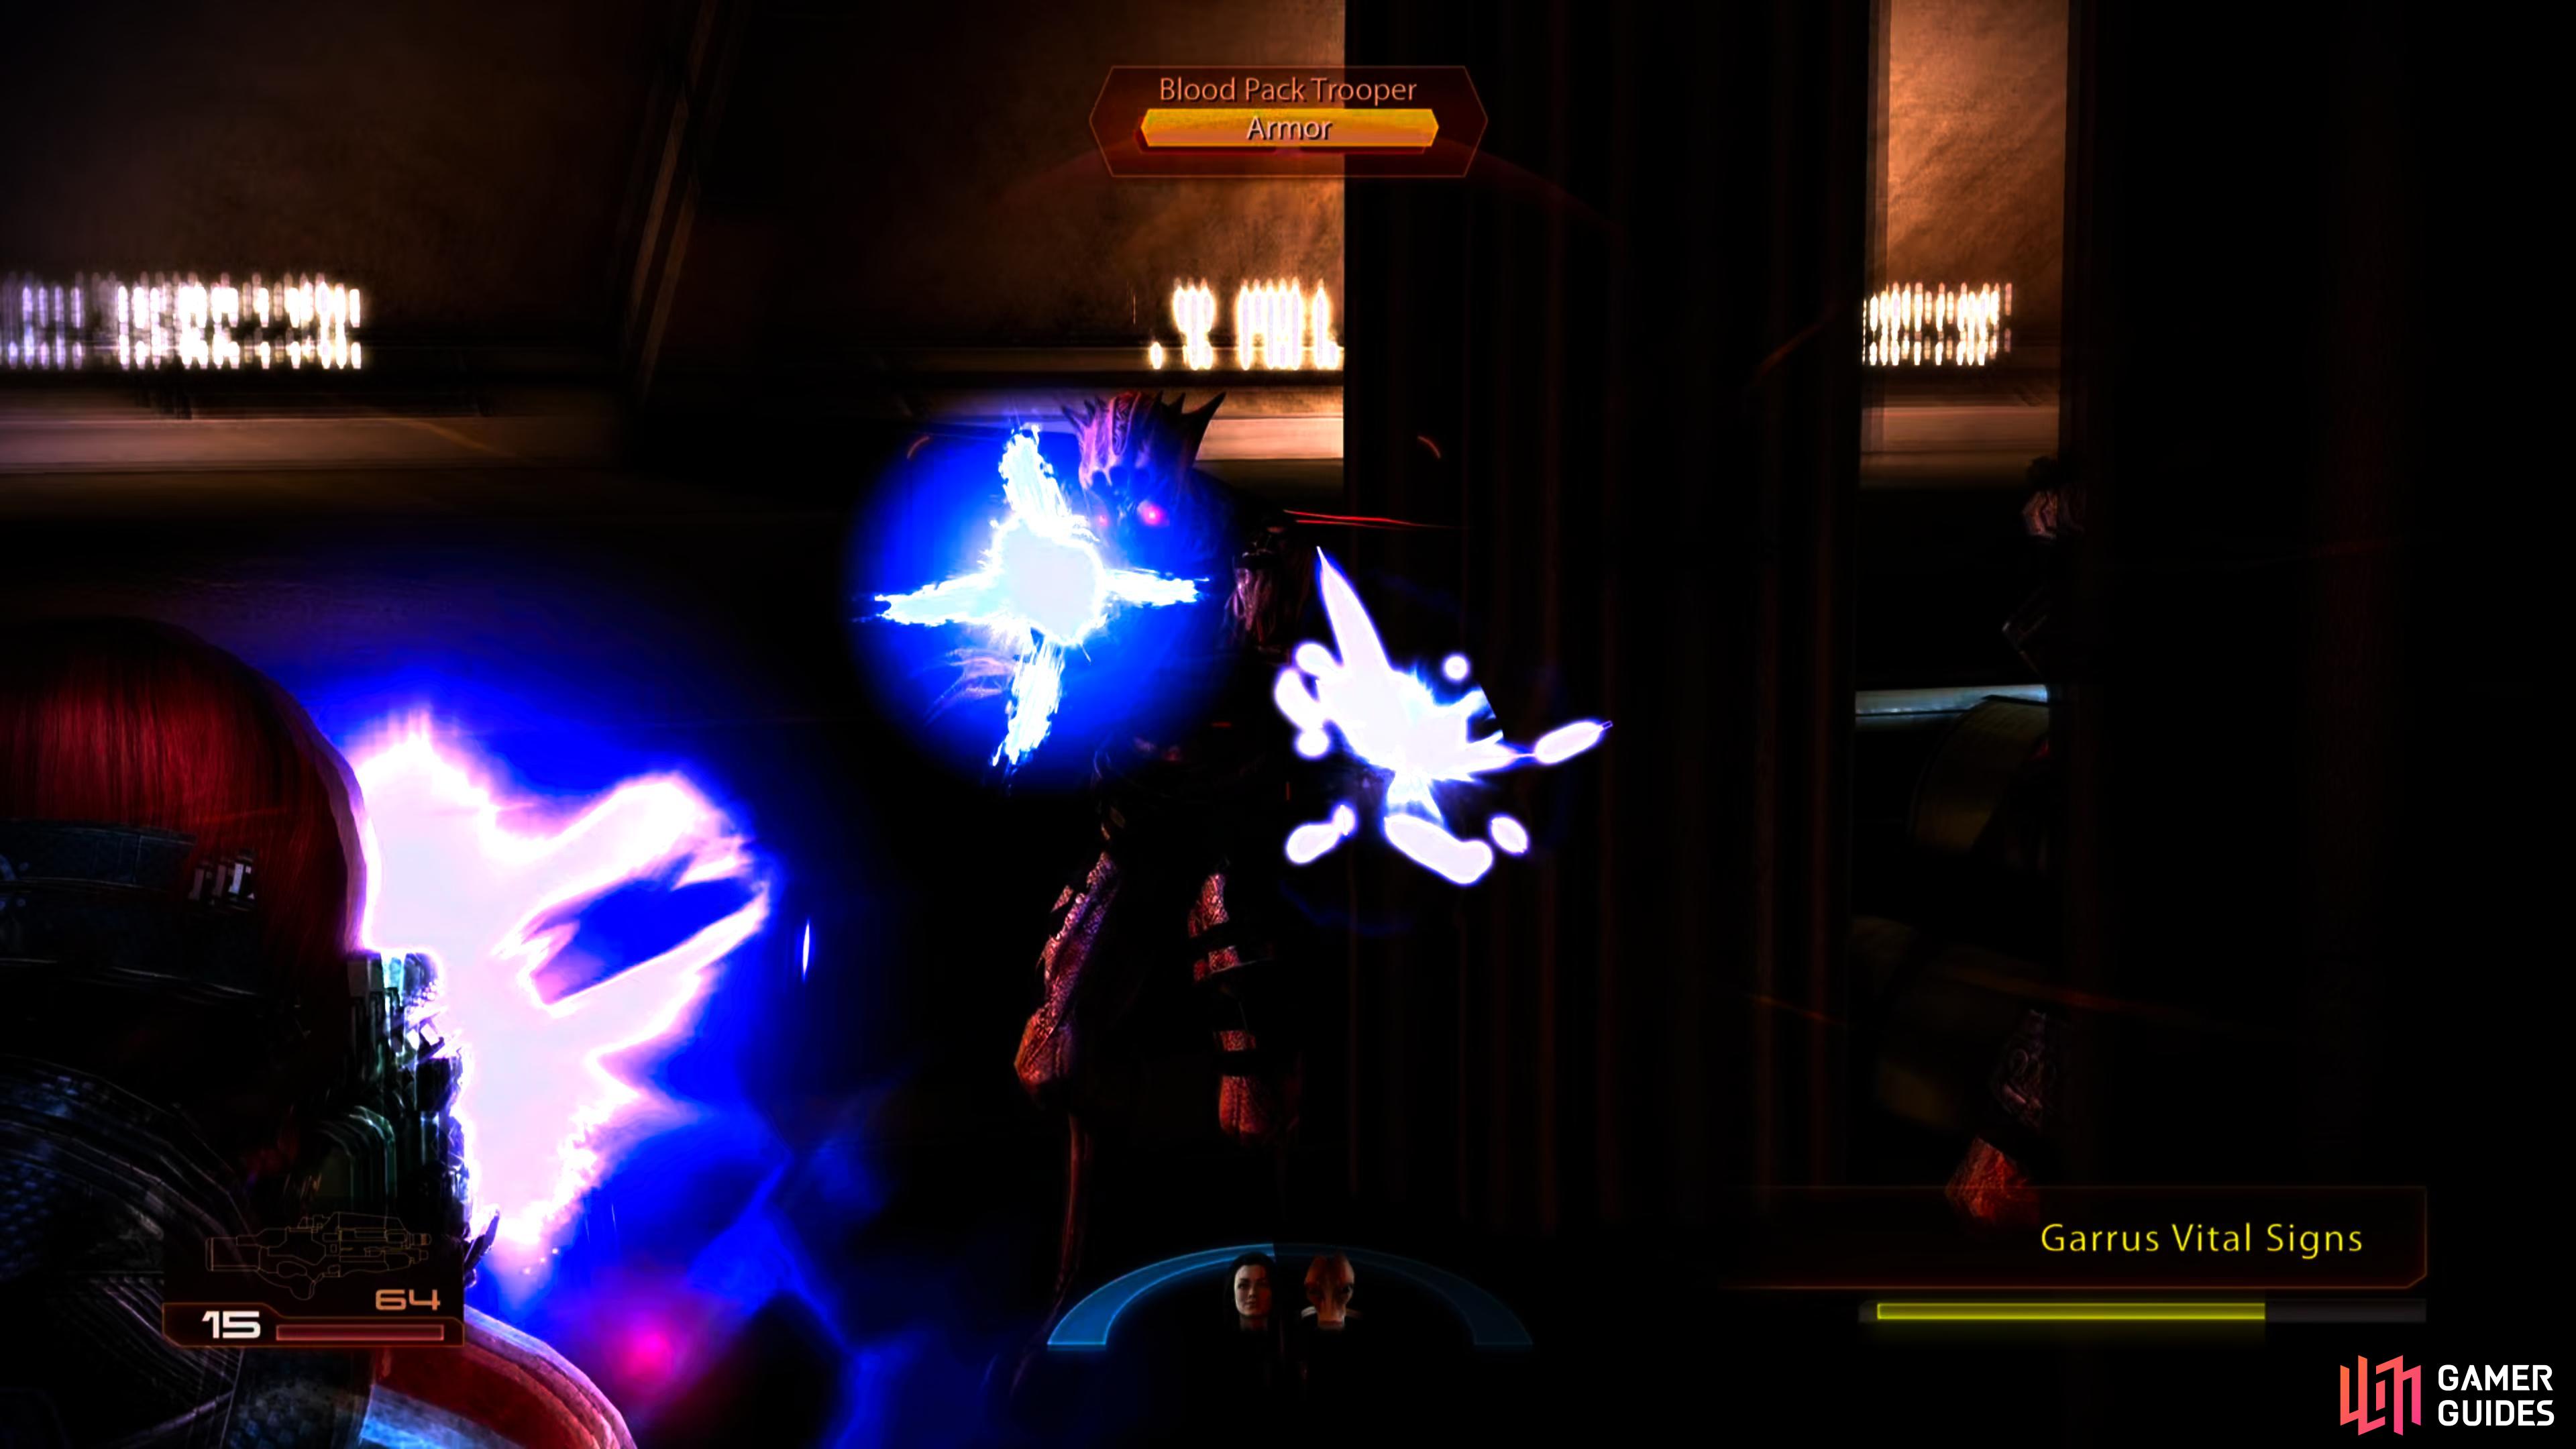 Fight through several vorcha - including pyros - in the hallway to the left,